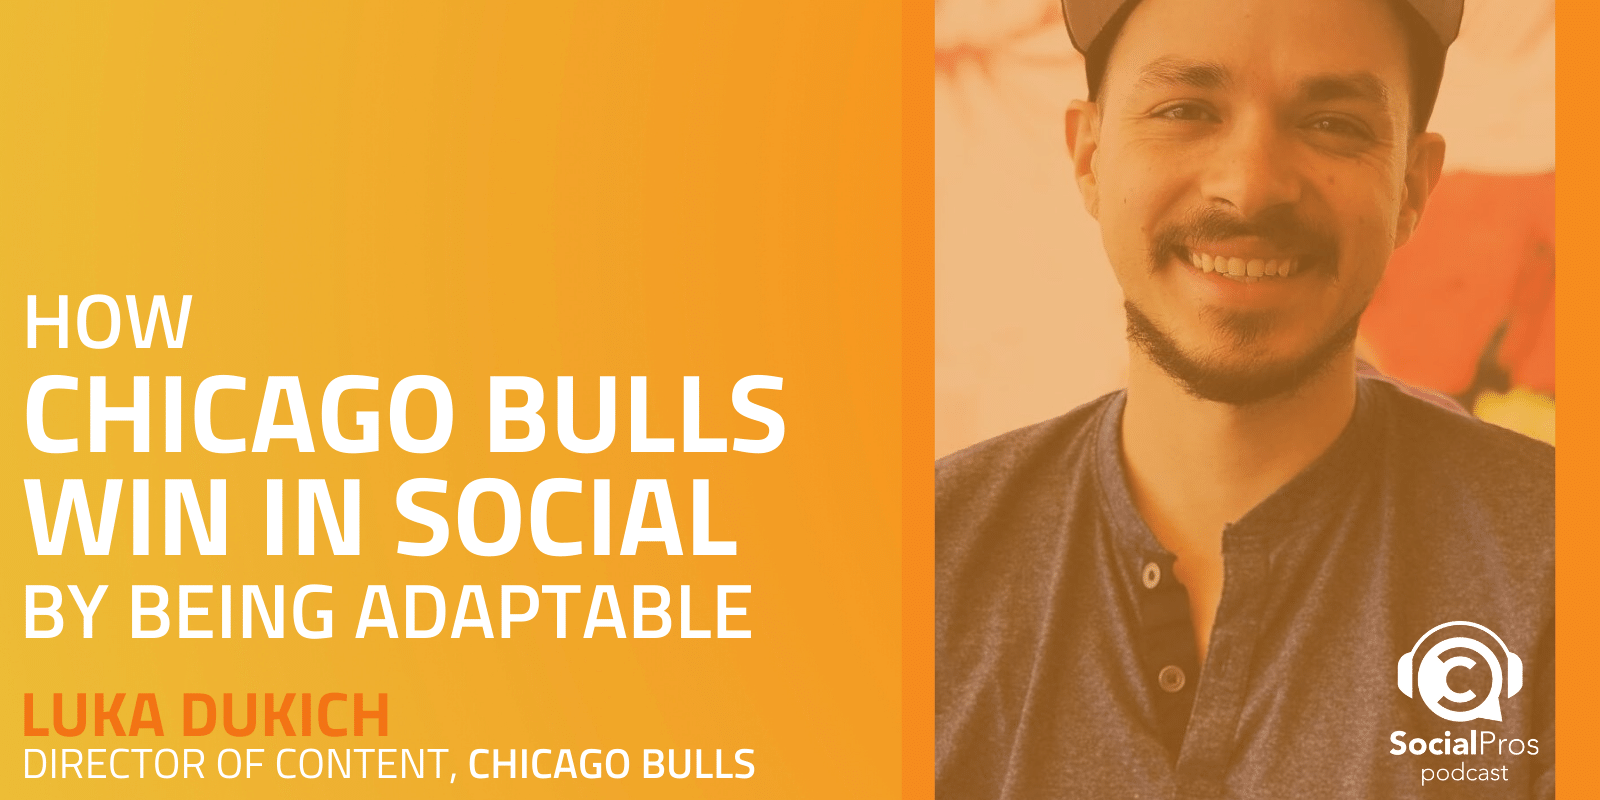 How Chicago Bulls Win in Social by Being Adaptable